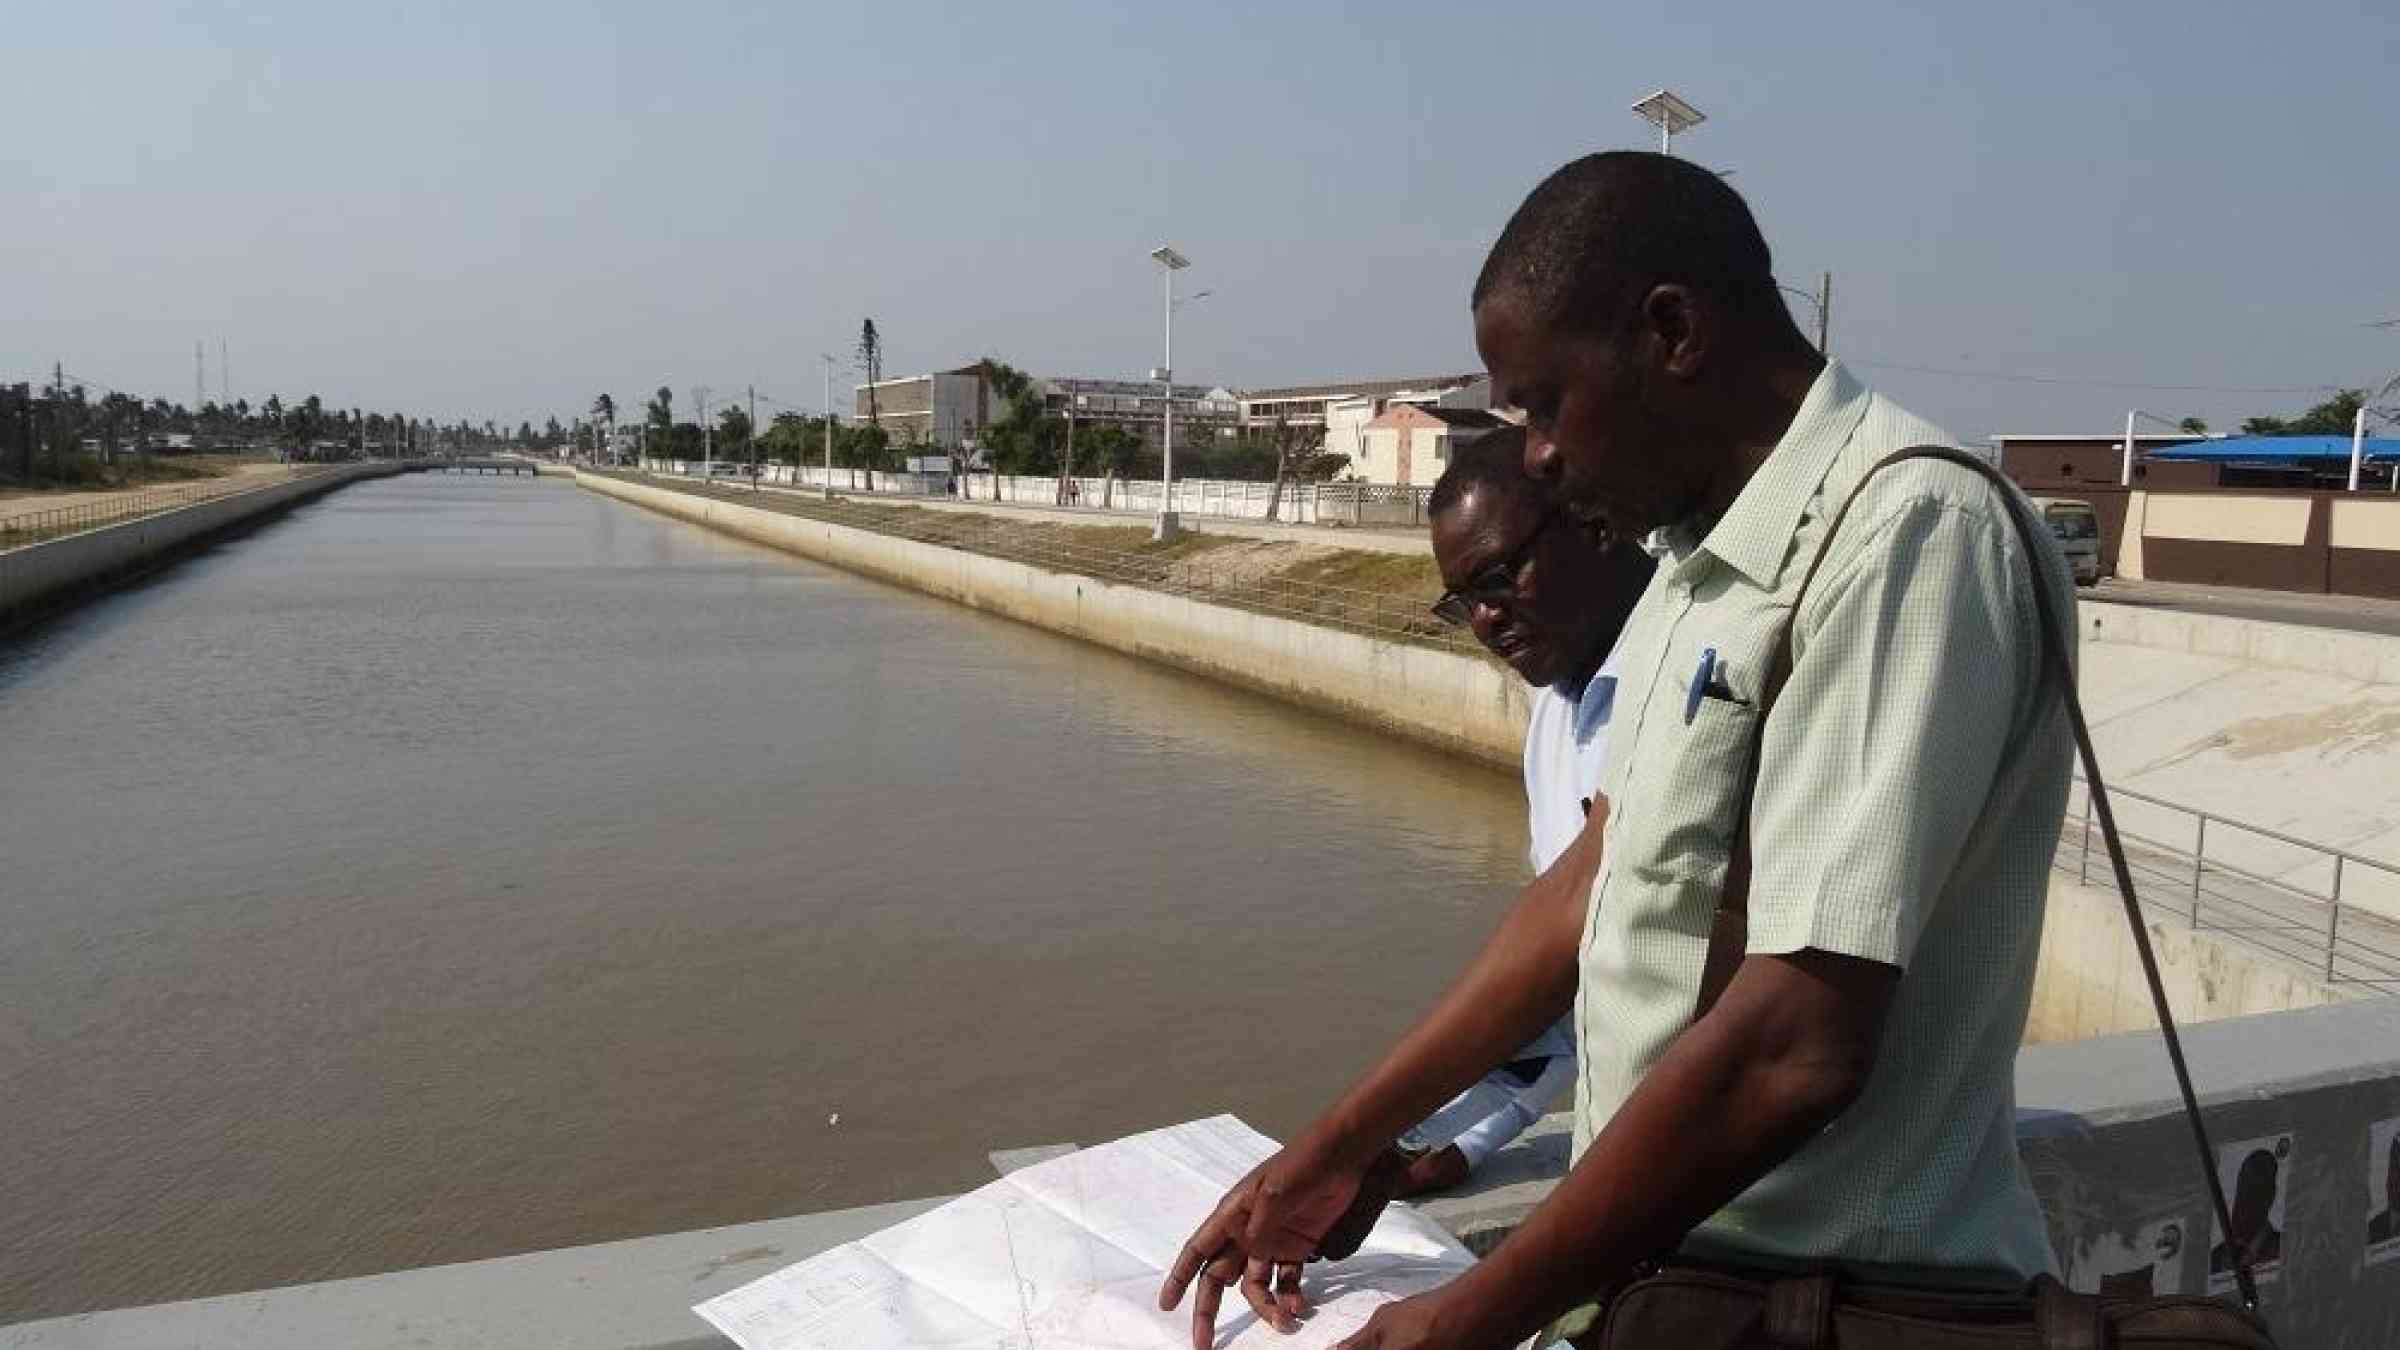 (From left) Jose Manuel Moisés, city councilor for institutional affairs and Beira city engineer, Augusto Manhoca, overlooking the canal which reduced the impact of the rains which hit Beira with Cyclone Idai in March, 2019